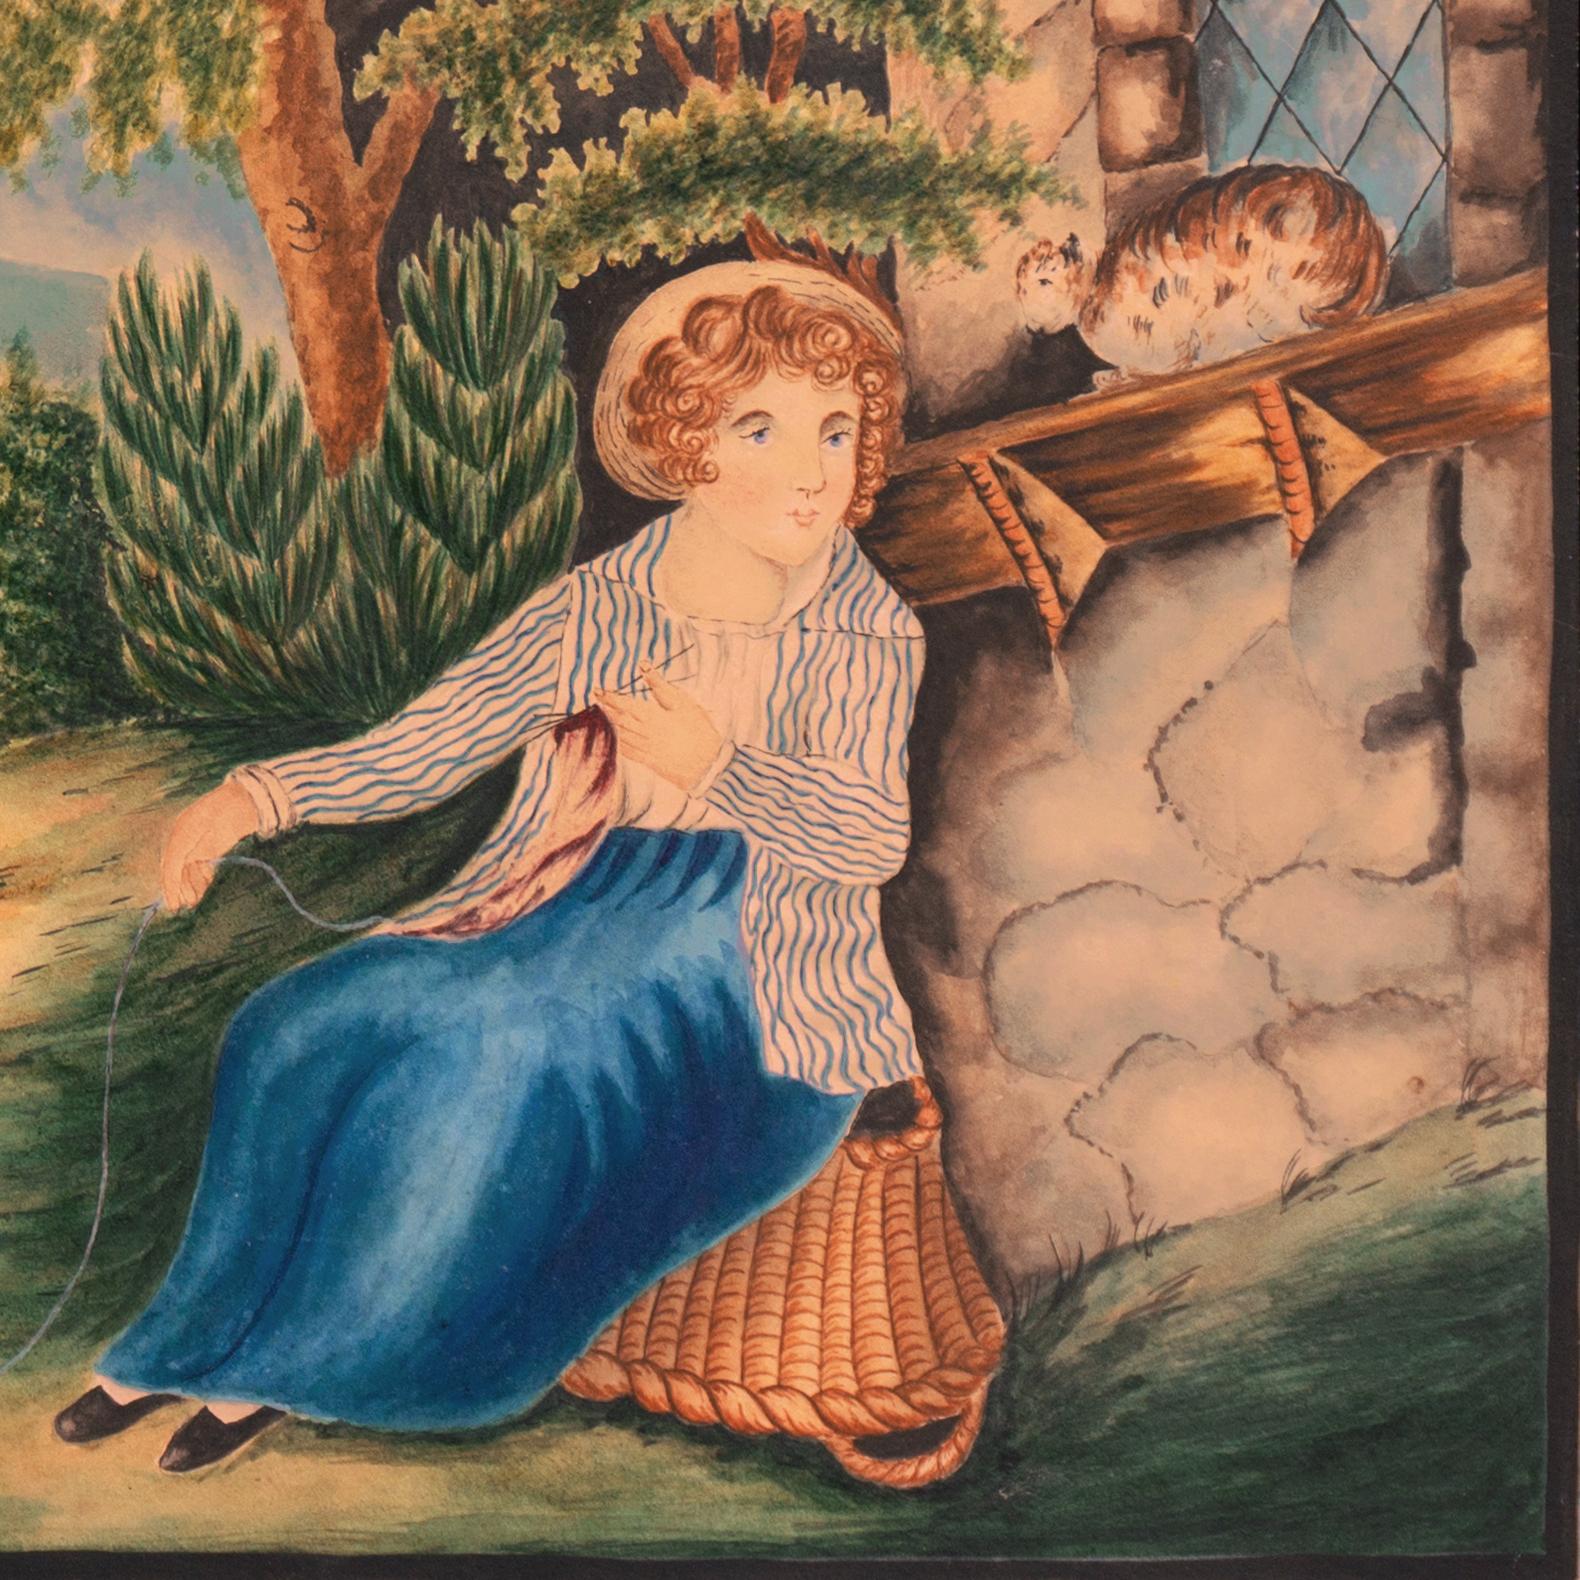 Watercolor and gouache on paper, American School painted circa 1830, Unsigned.

An idyllic view of Early American frontier life showing a peaceful scene of a young woman knitting and seated, with a tabby cat, beside a solid, stone-built cabin and a